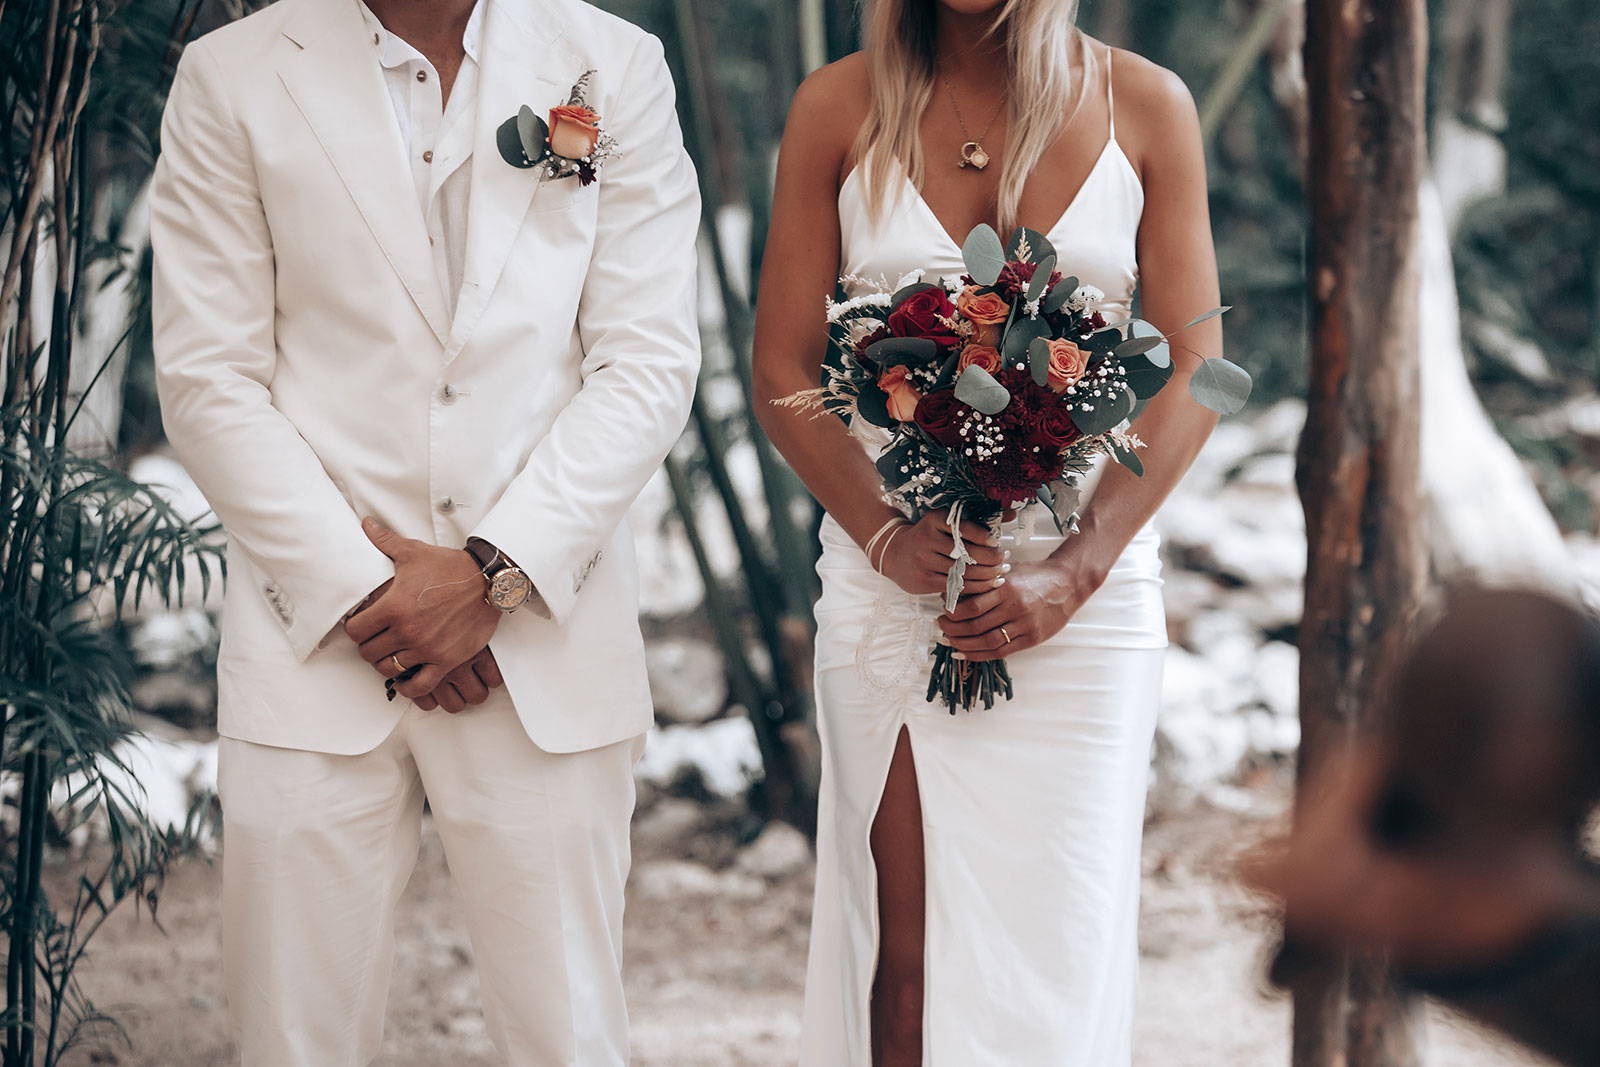 Bride and groom standing next to each other